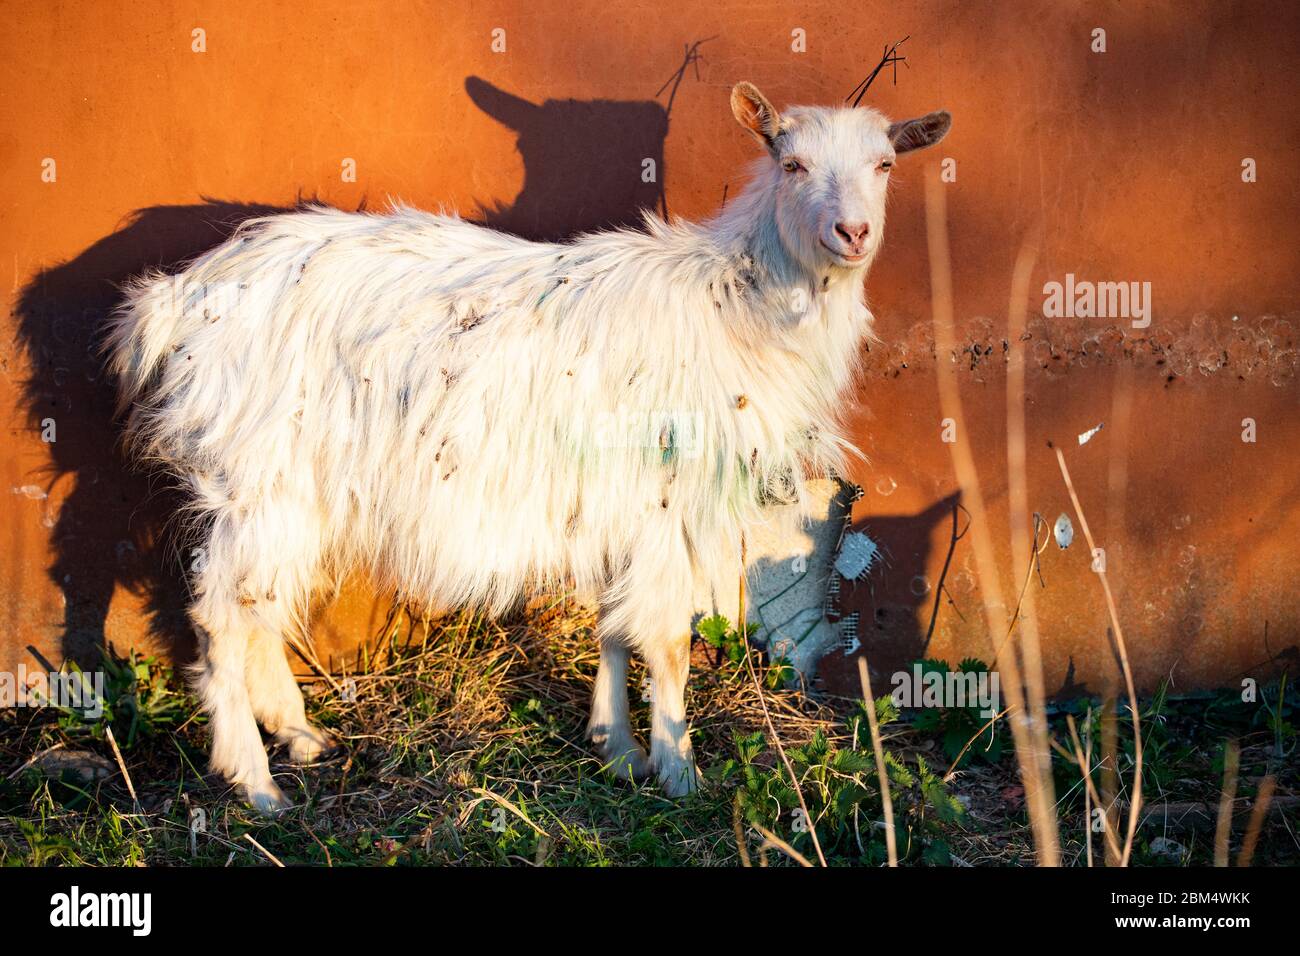 goat against an orange wall Stock Photo